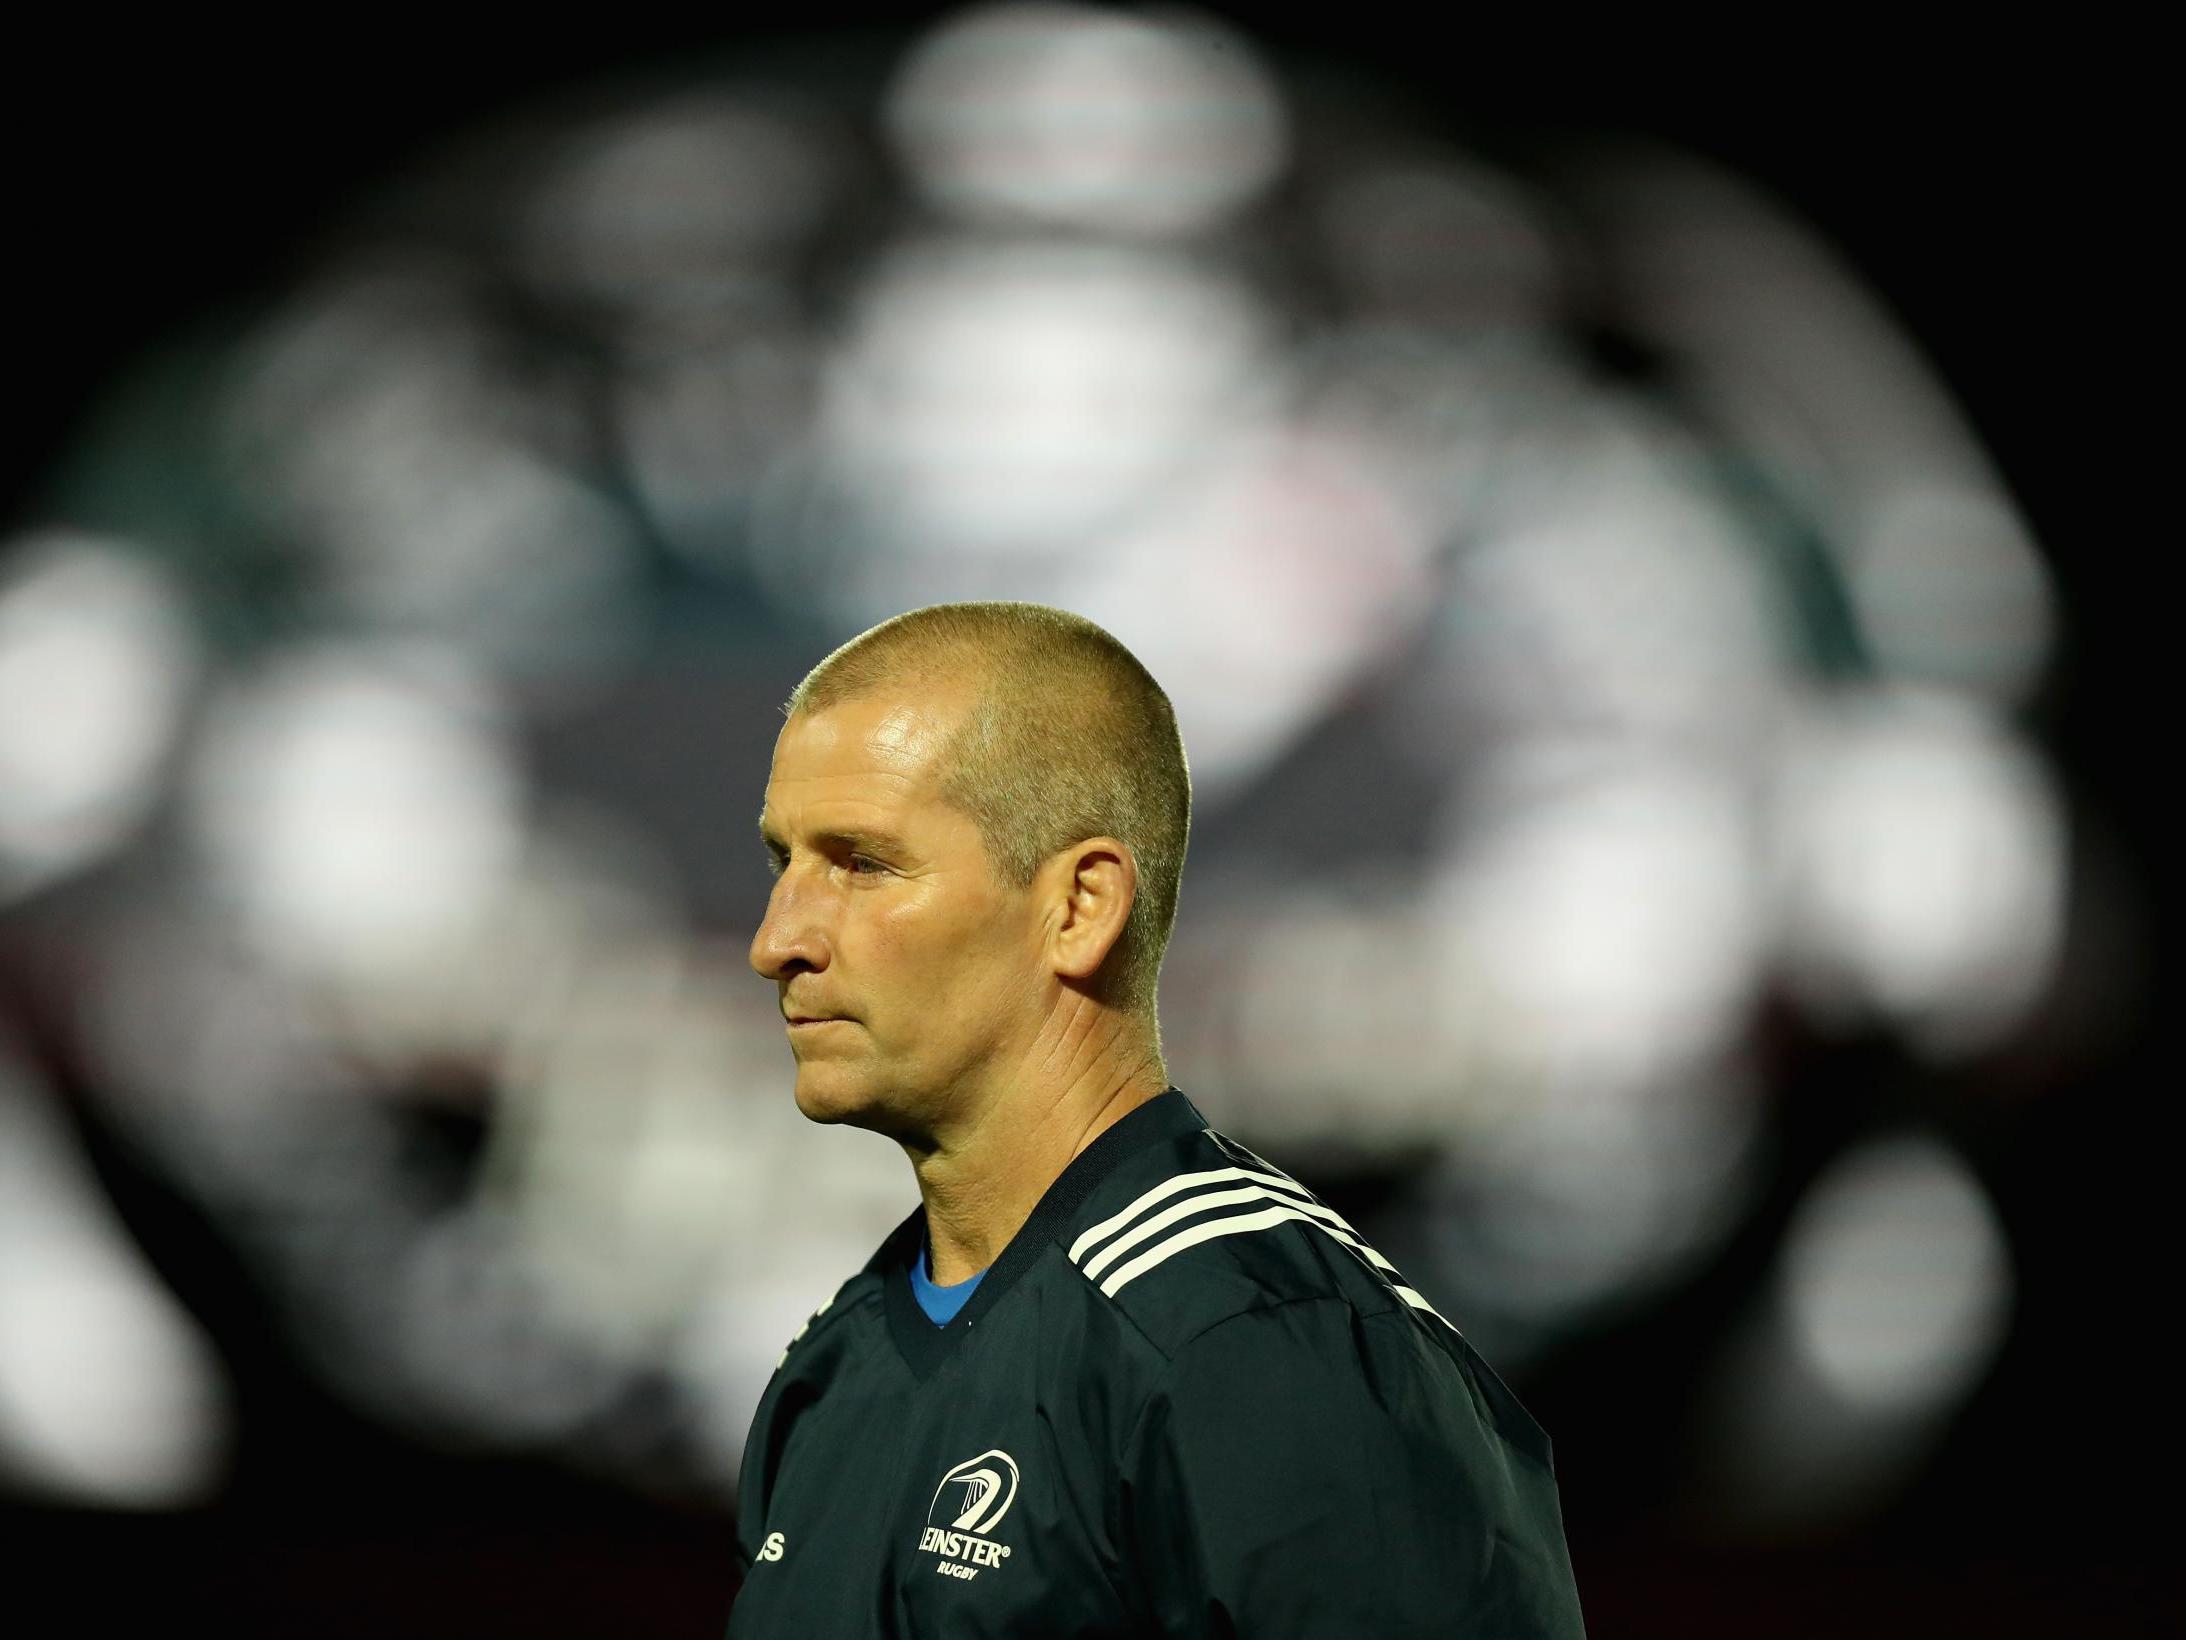 Stuart Lancaster has not been ruled out replacing Eddie Jones as England head coach